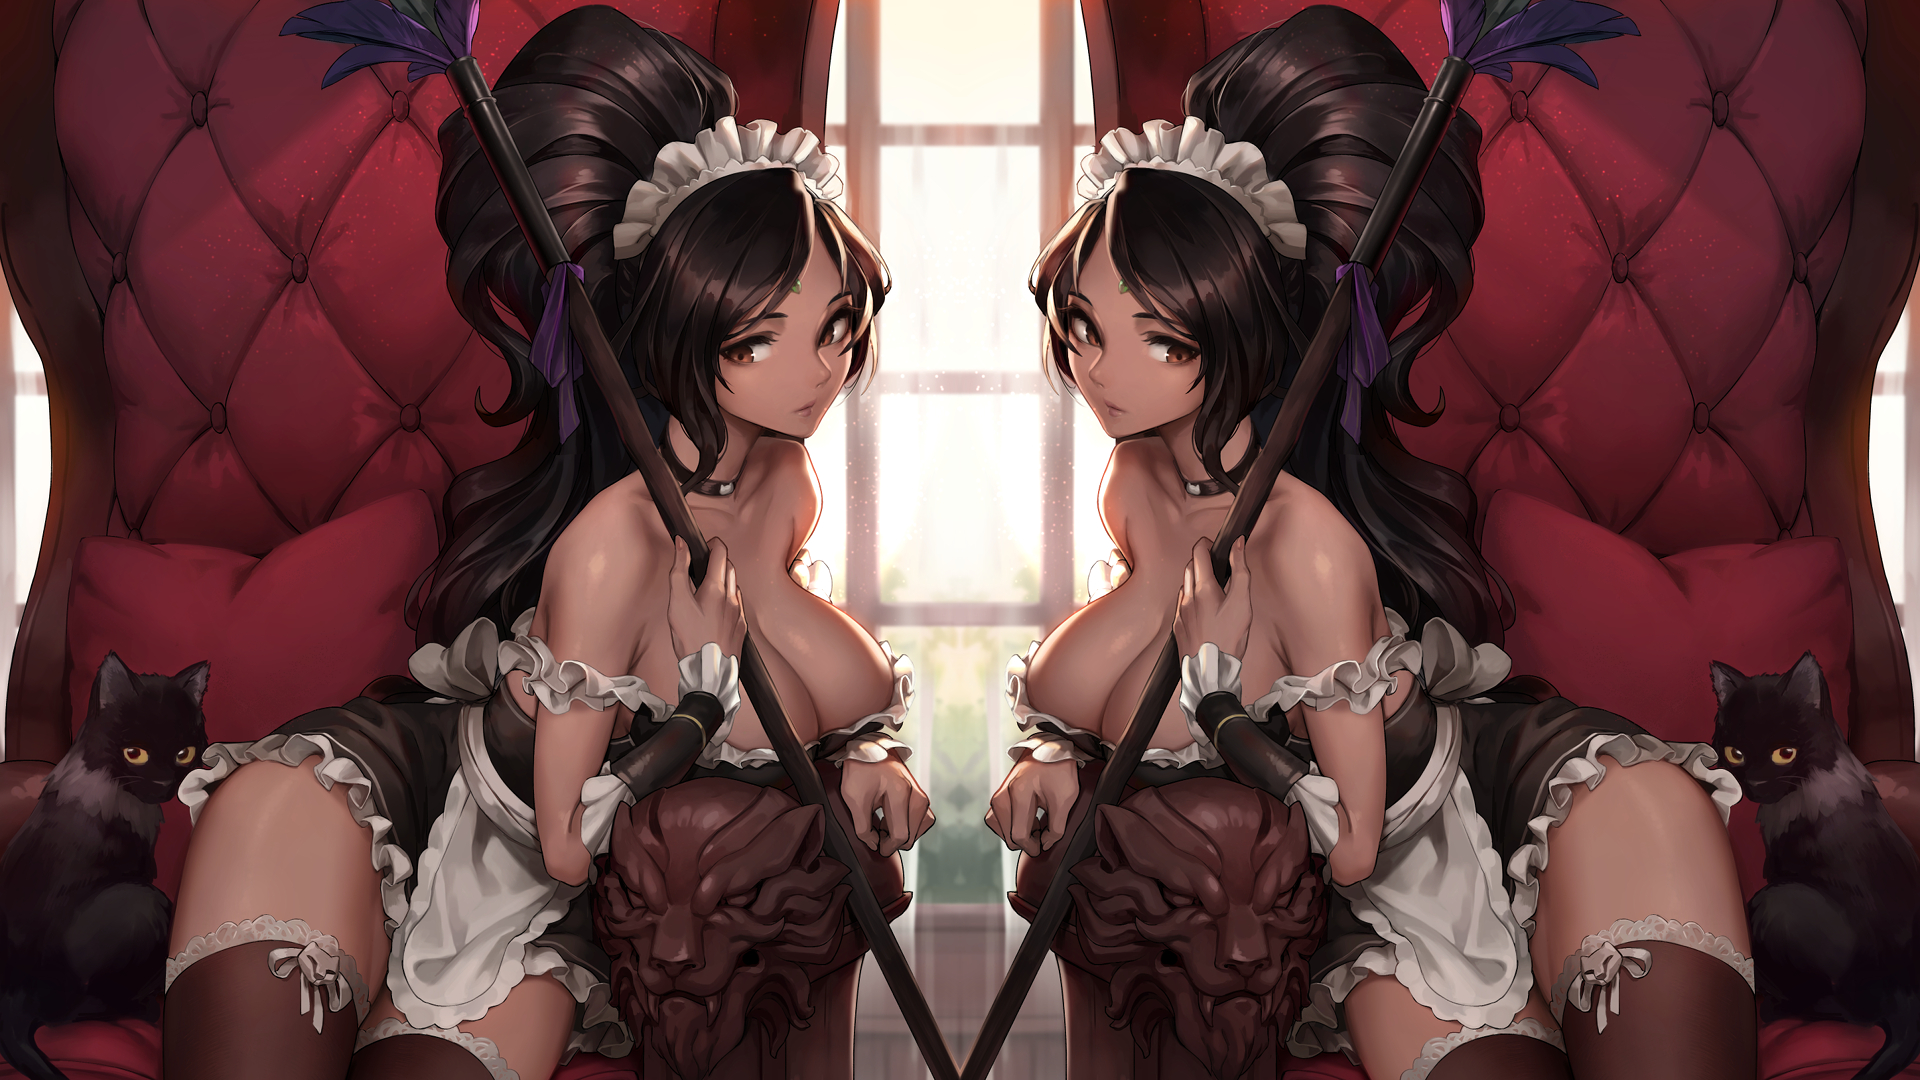 General 1920x1080 big boobs Nidalee (League of Legends) cleavage League of Legends maid outfit brunette digital art